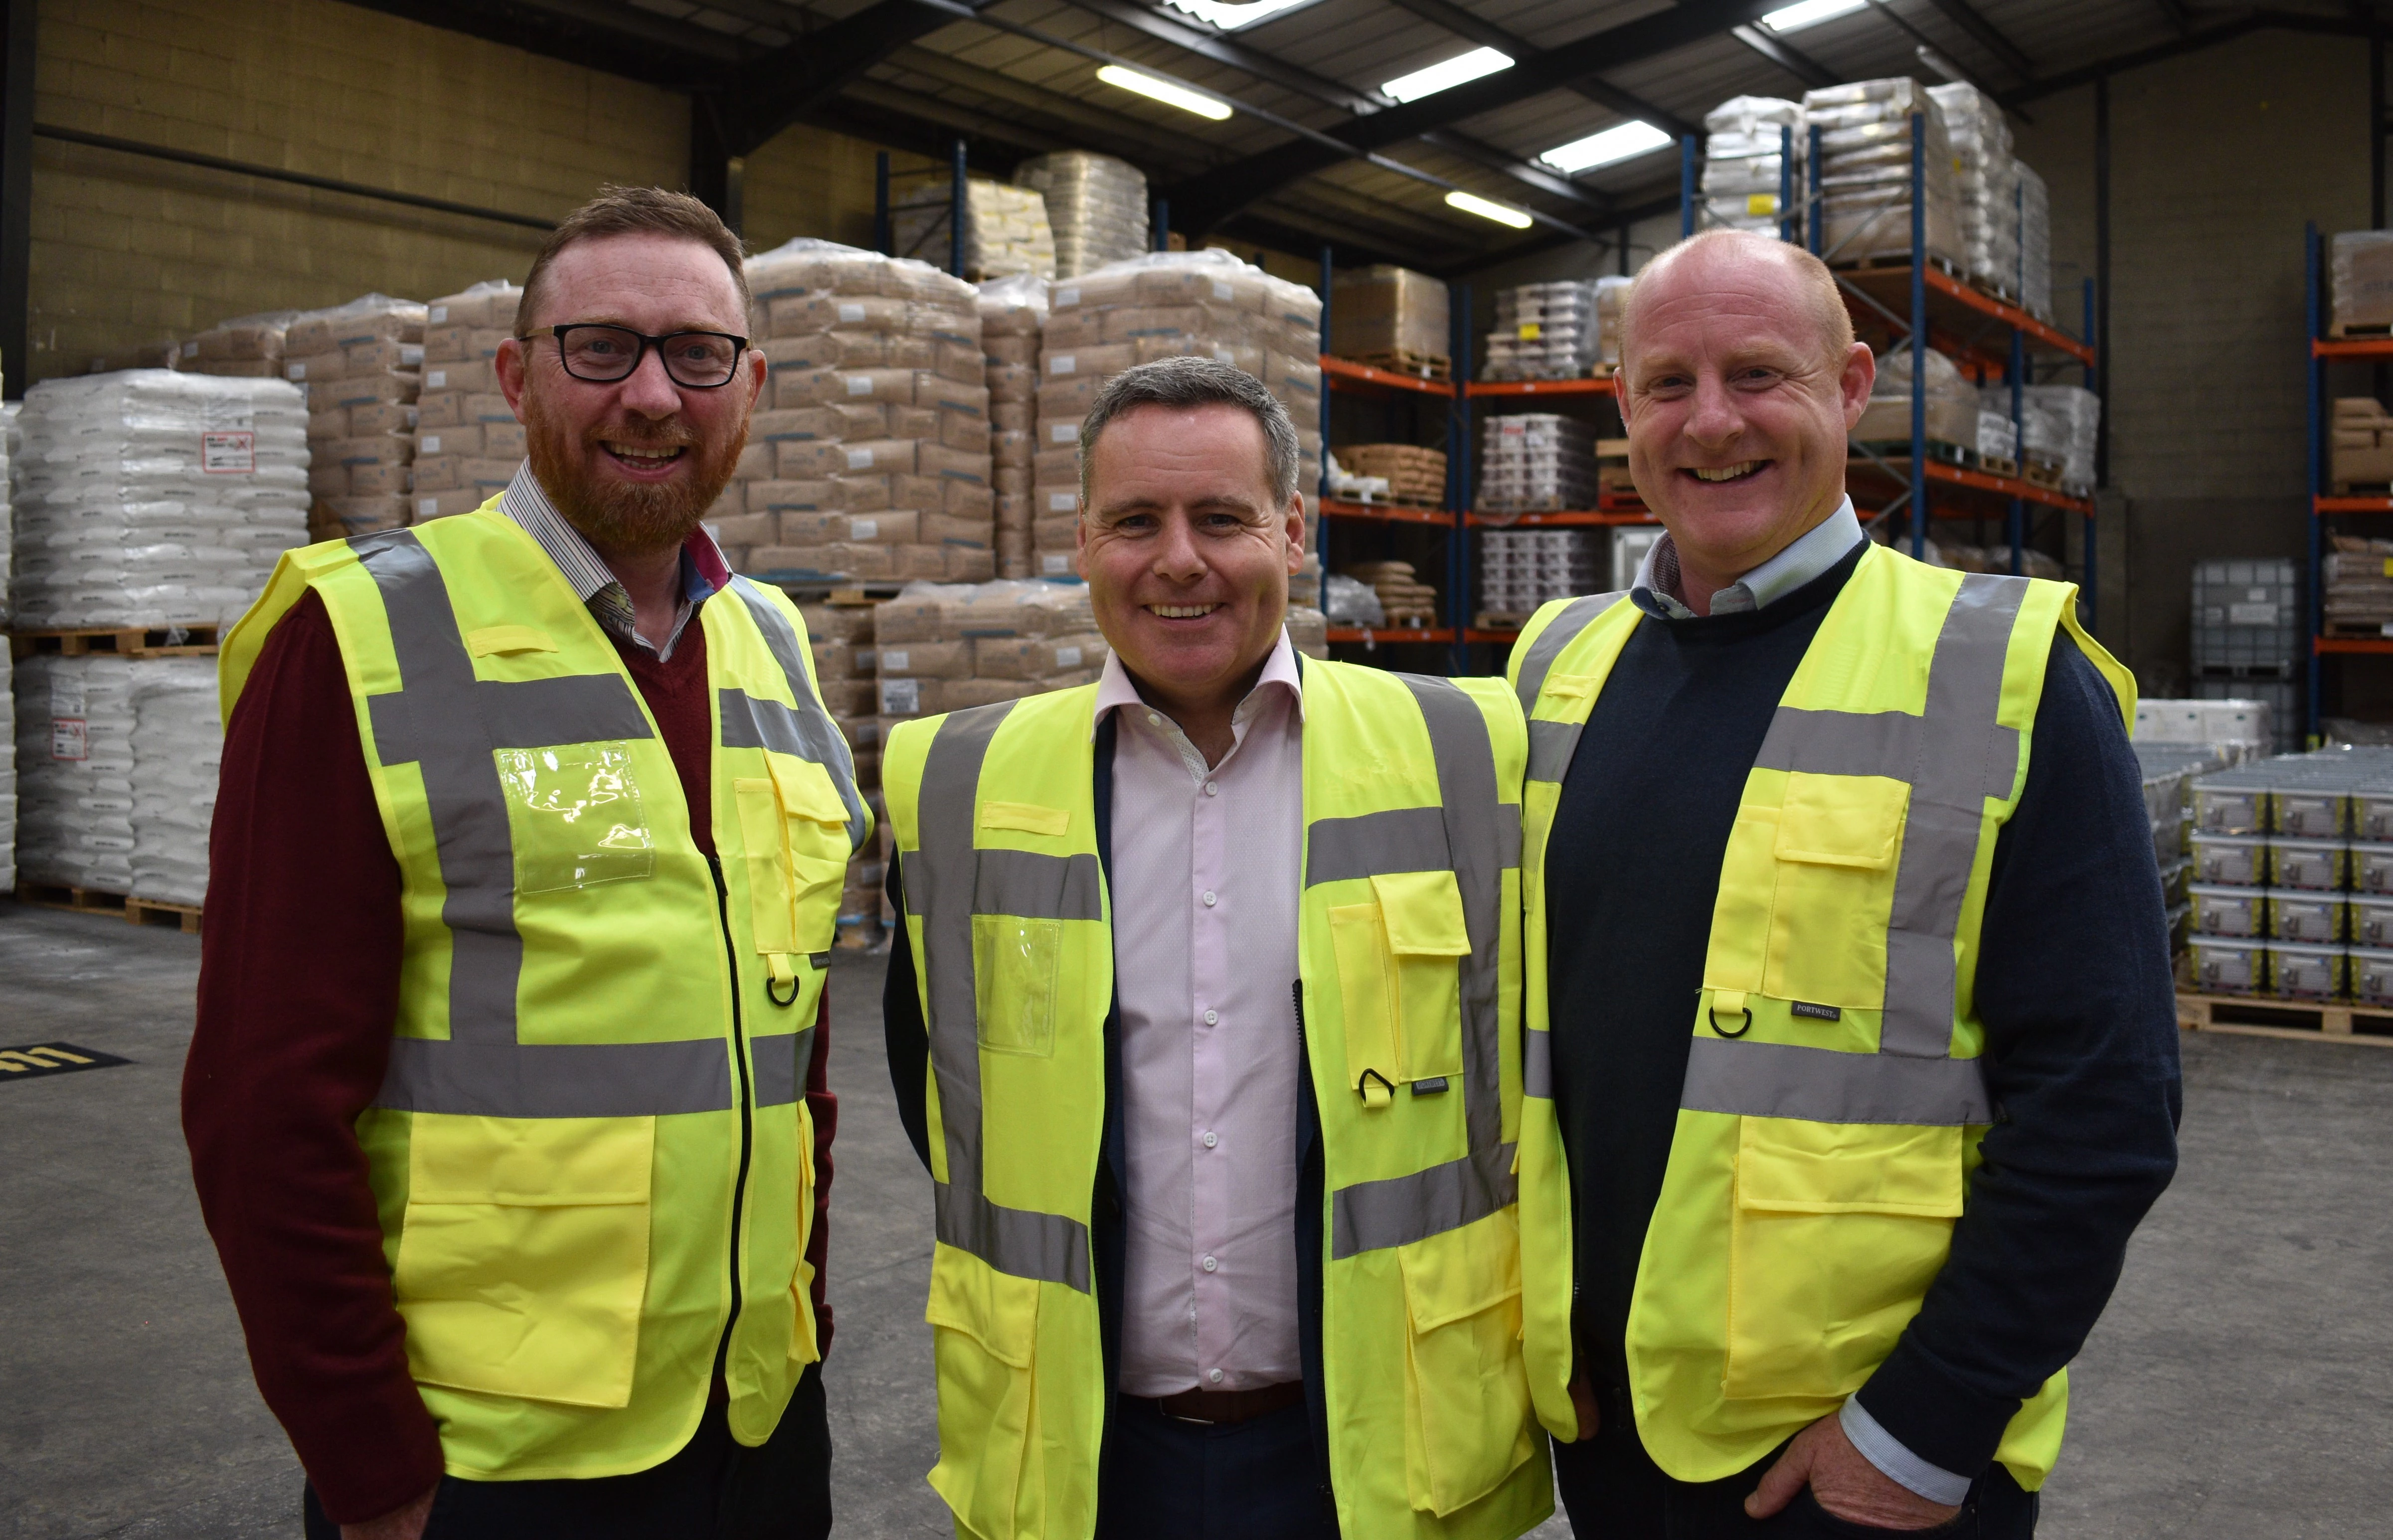 Oscretes’ Scott Wilson (centre) with (L-R) Gus Vaughan and Johnny Mooney of Adcrete